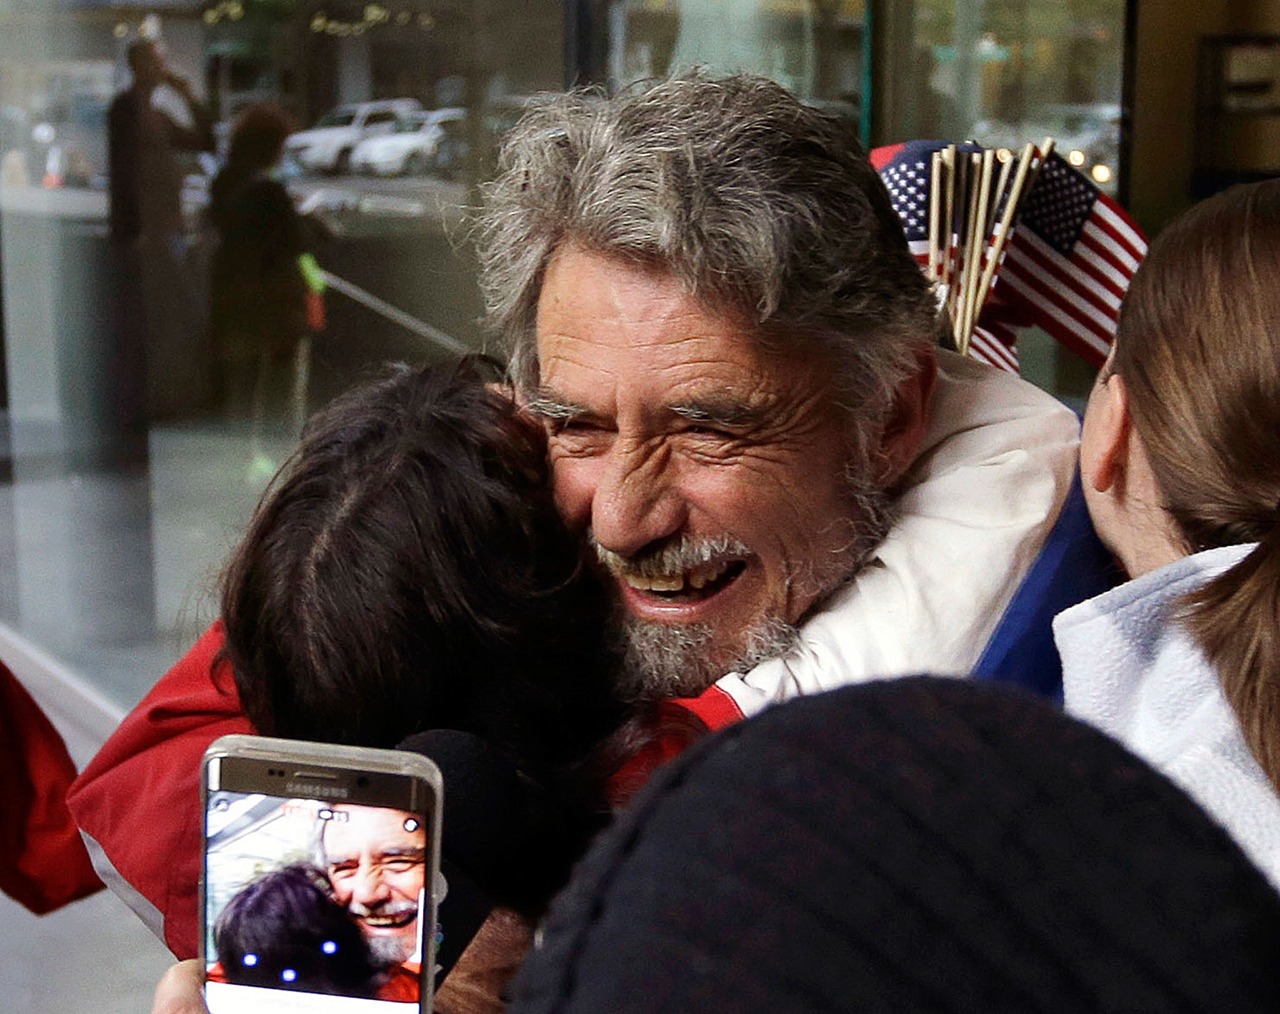 Defendant Neil Wampler is greeted by supporters as he leaves federal court in Portland, Oregon, on Thursday. (AP Photo/Don Ryan)